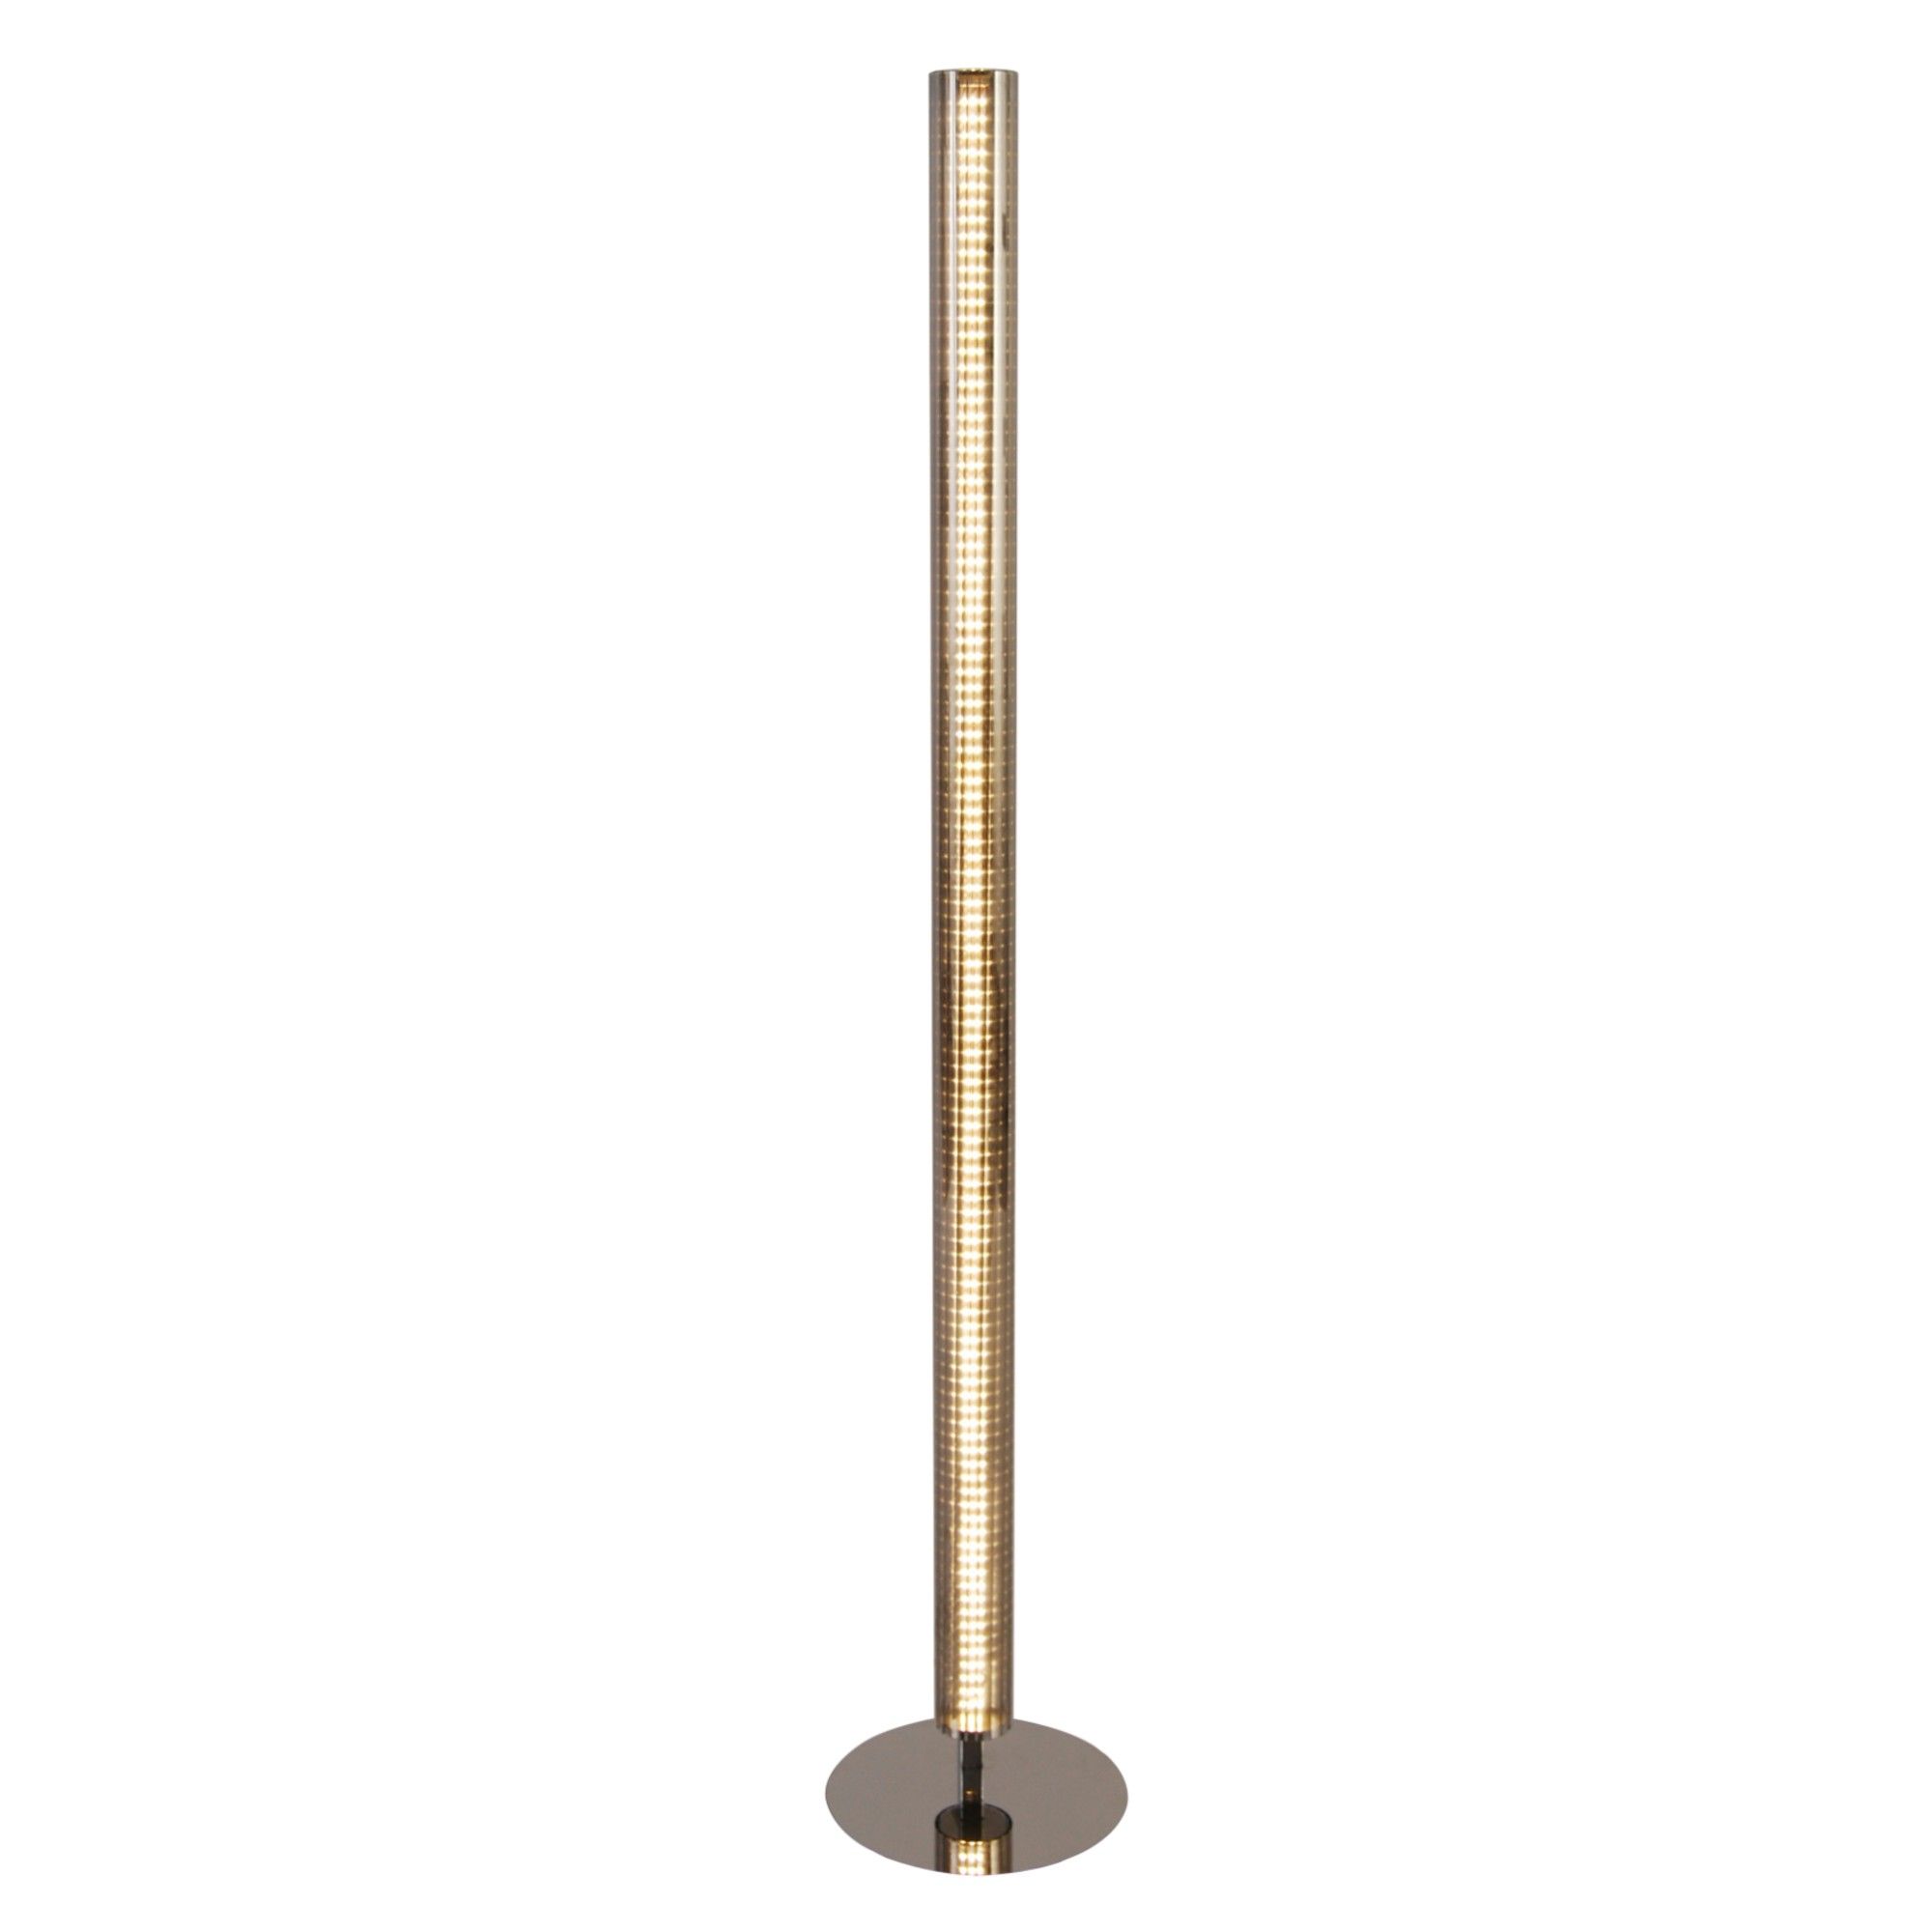 A modern floor lamp, the Alvar LED floor lamp is a beautifully contemporary piece, exclusive to Pagazzi Lighting. Boasting a stunning smoked glass, ribbed cylindrical shade, this floor lamp features a linear strip of warm white LED light, which creates a fascinating illumination. Offering a 3 stage dimmer function, this floor lamp is perfect for creating atmospheric light in living rooms and hallways.
Height: 130cm
Diameter: 23cm
Kelvins: 3000k Warm White
Wattage: 22w
Light Bulb: Integrated LED